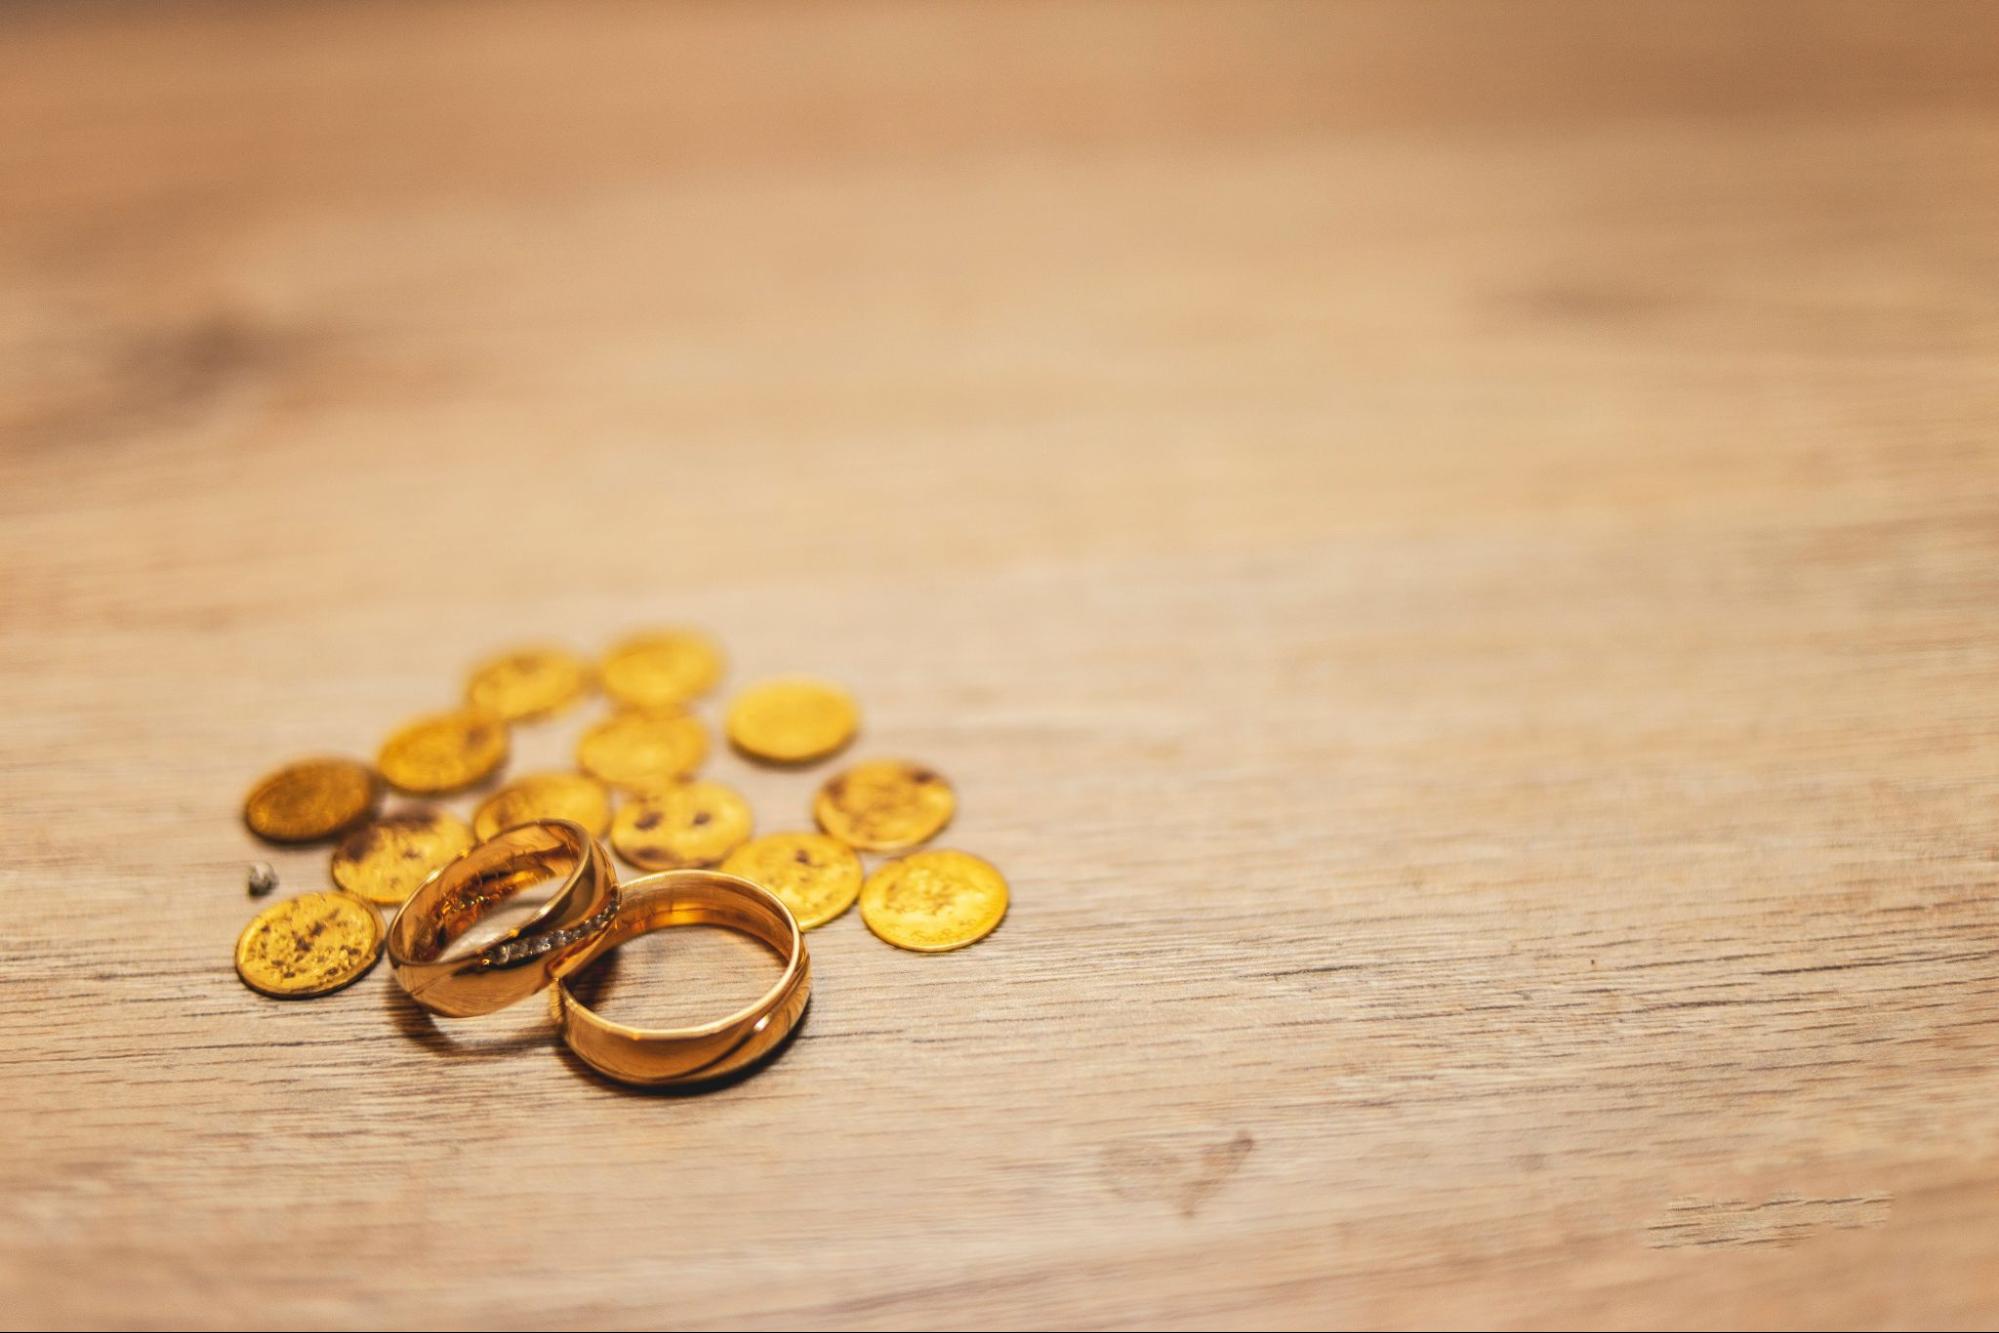 Two gold rings sit by gold coins on a wooden table.